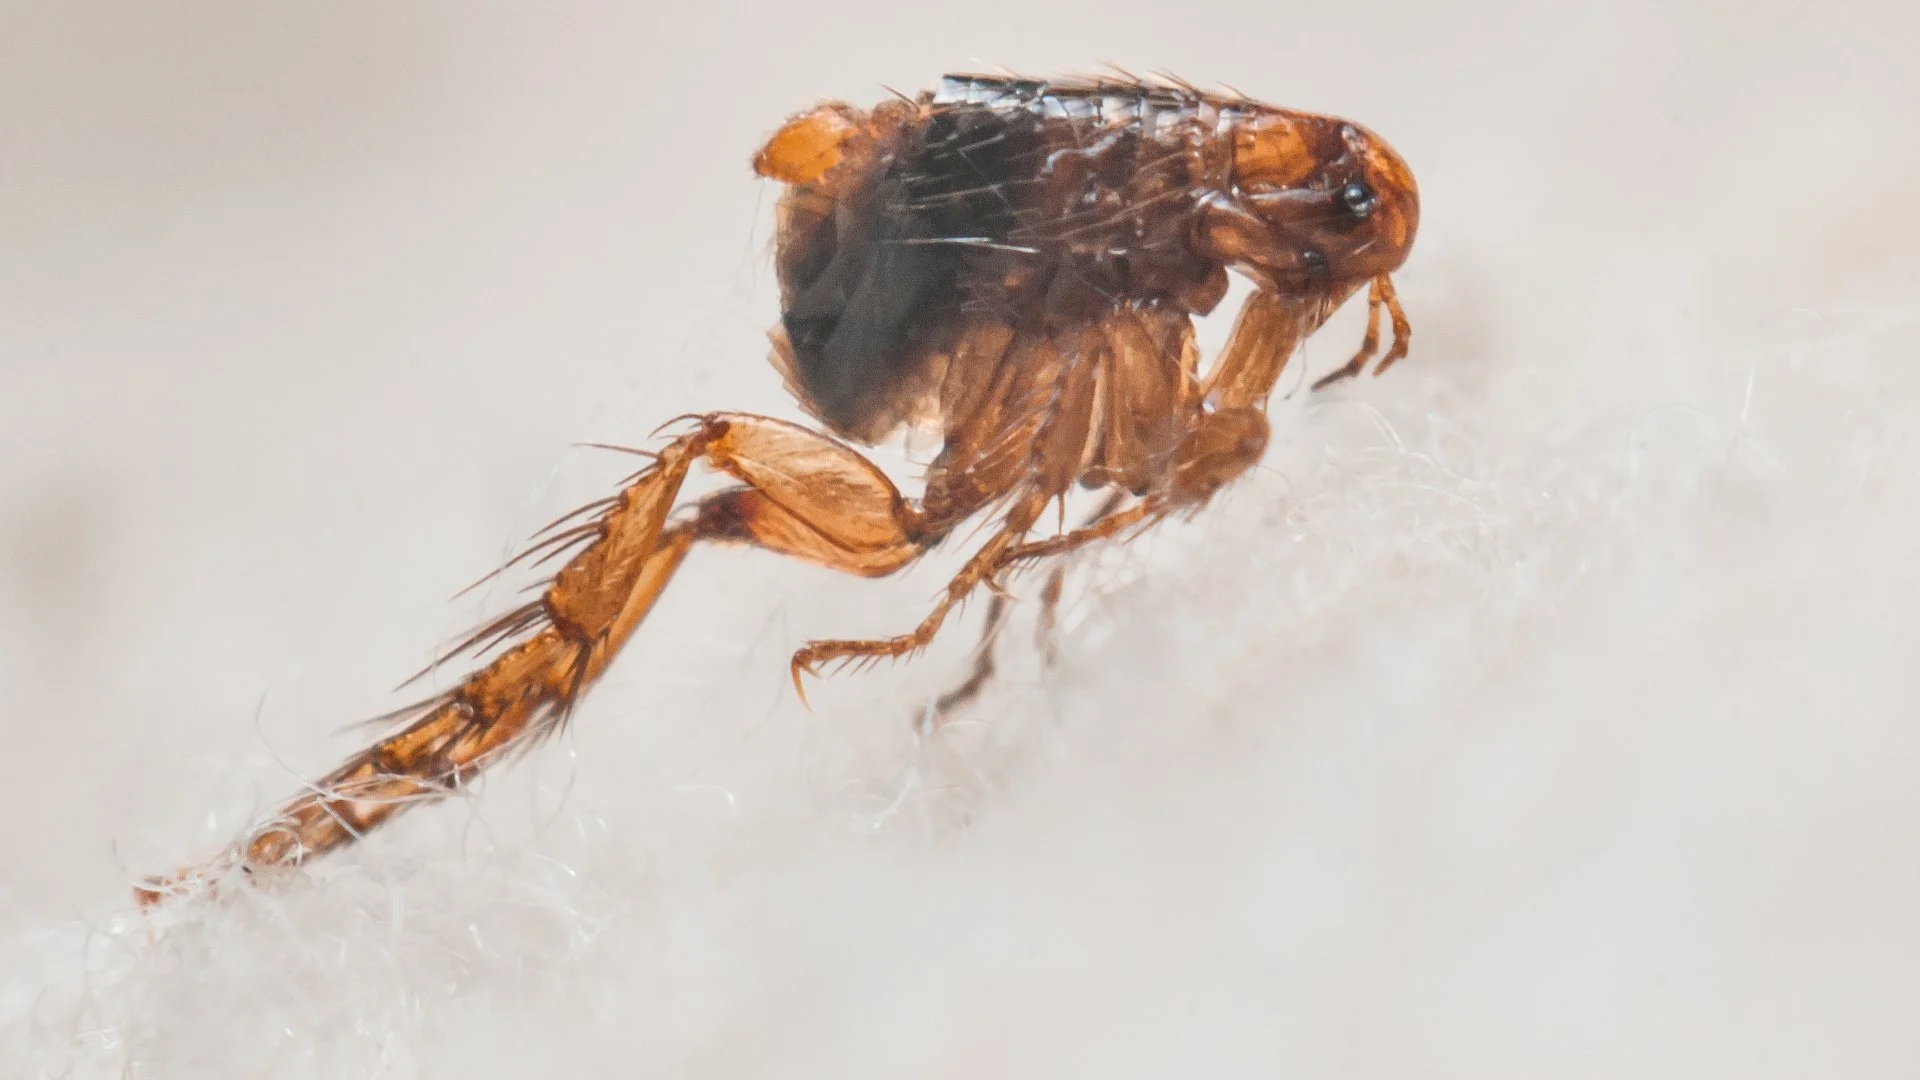 How Can You Tell if You Have a Flea Infestation & What Should You Do?